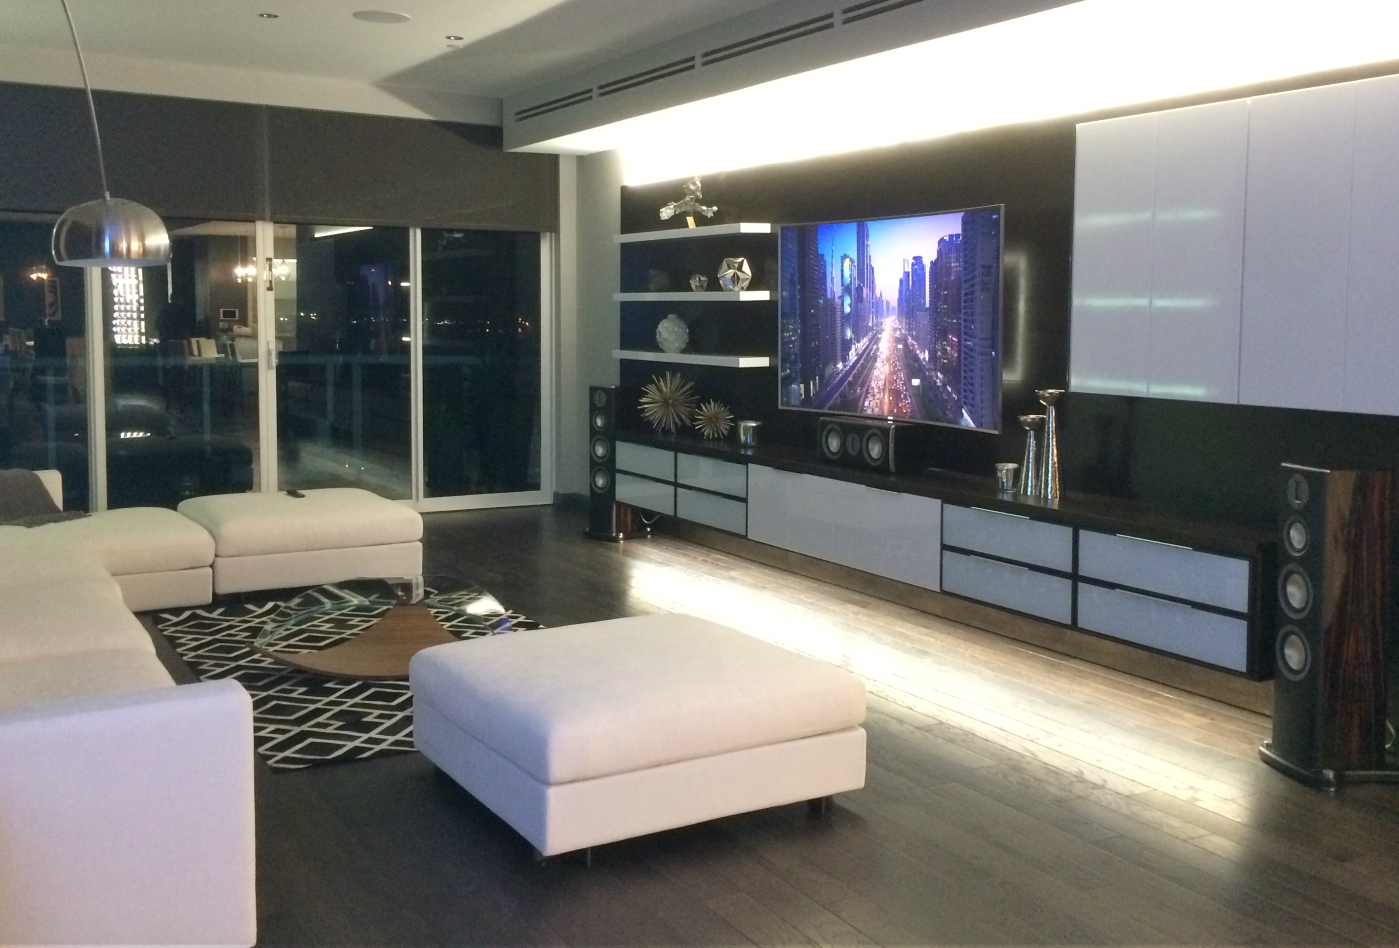  At Night this modern family room comes alive with led accent lighting and the sound of its Monitor Audio Platinum Series Home Theatre 